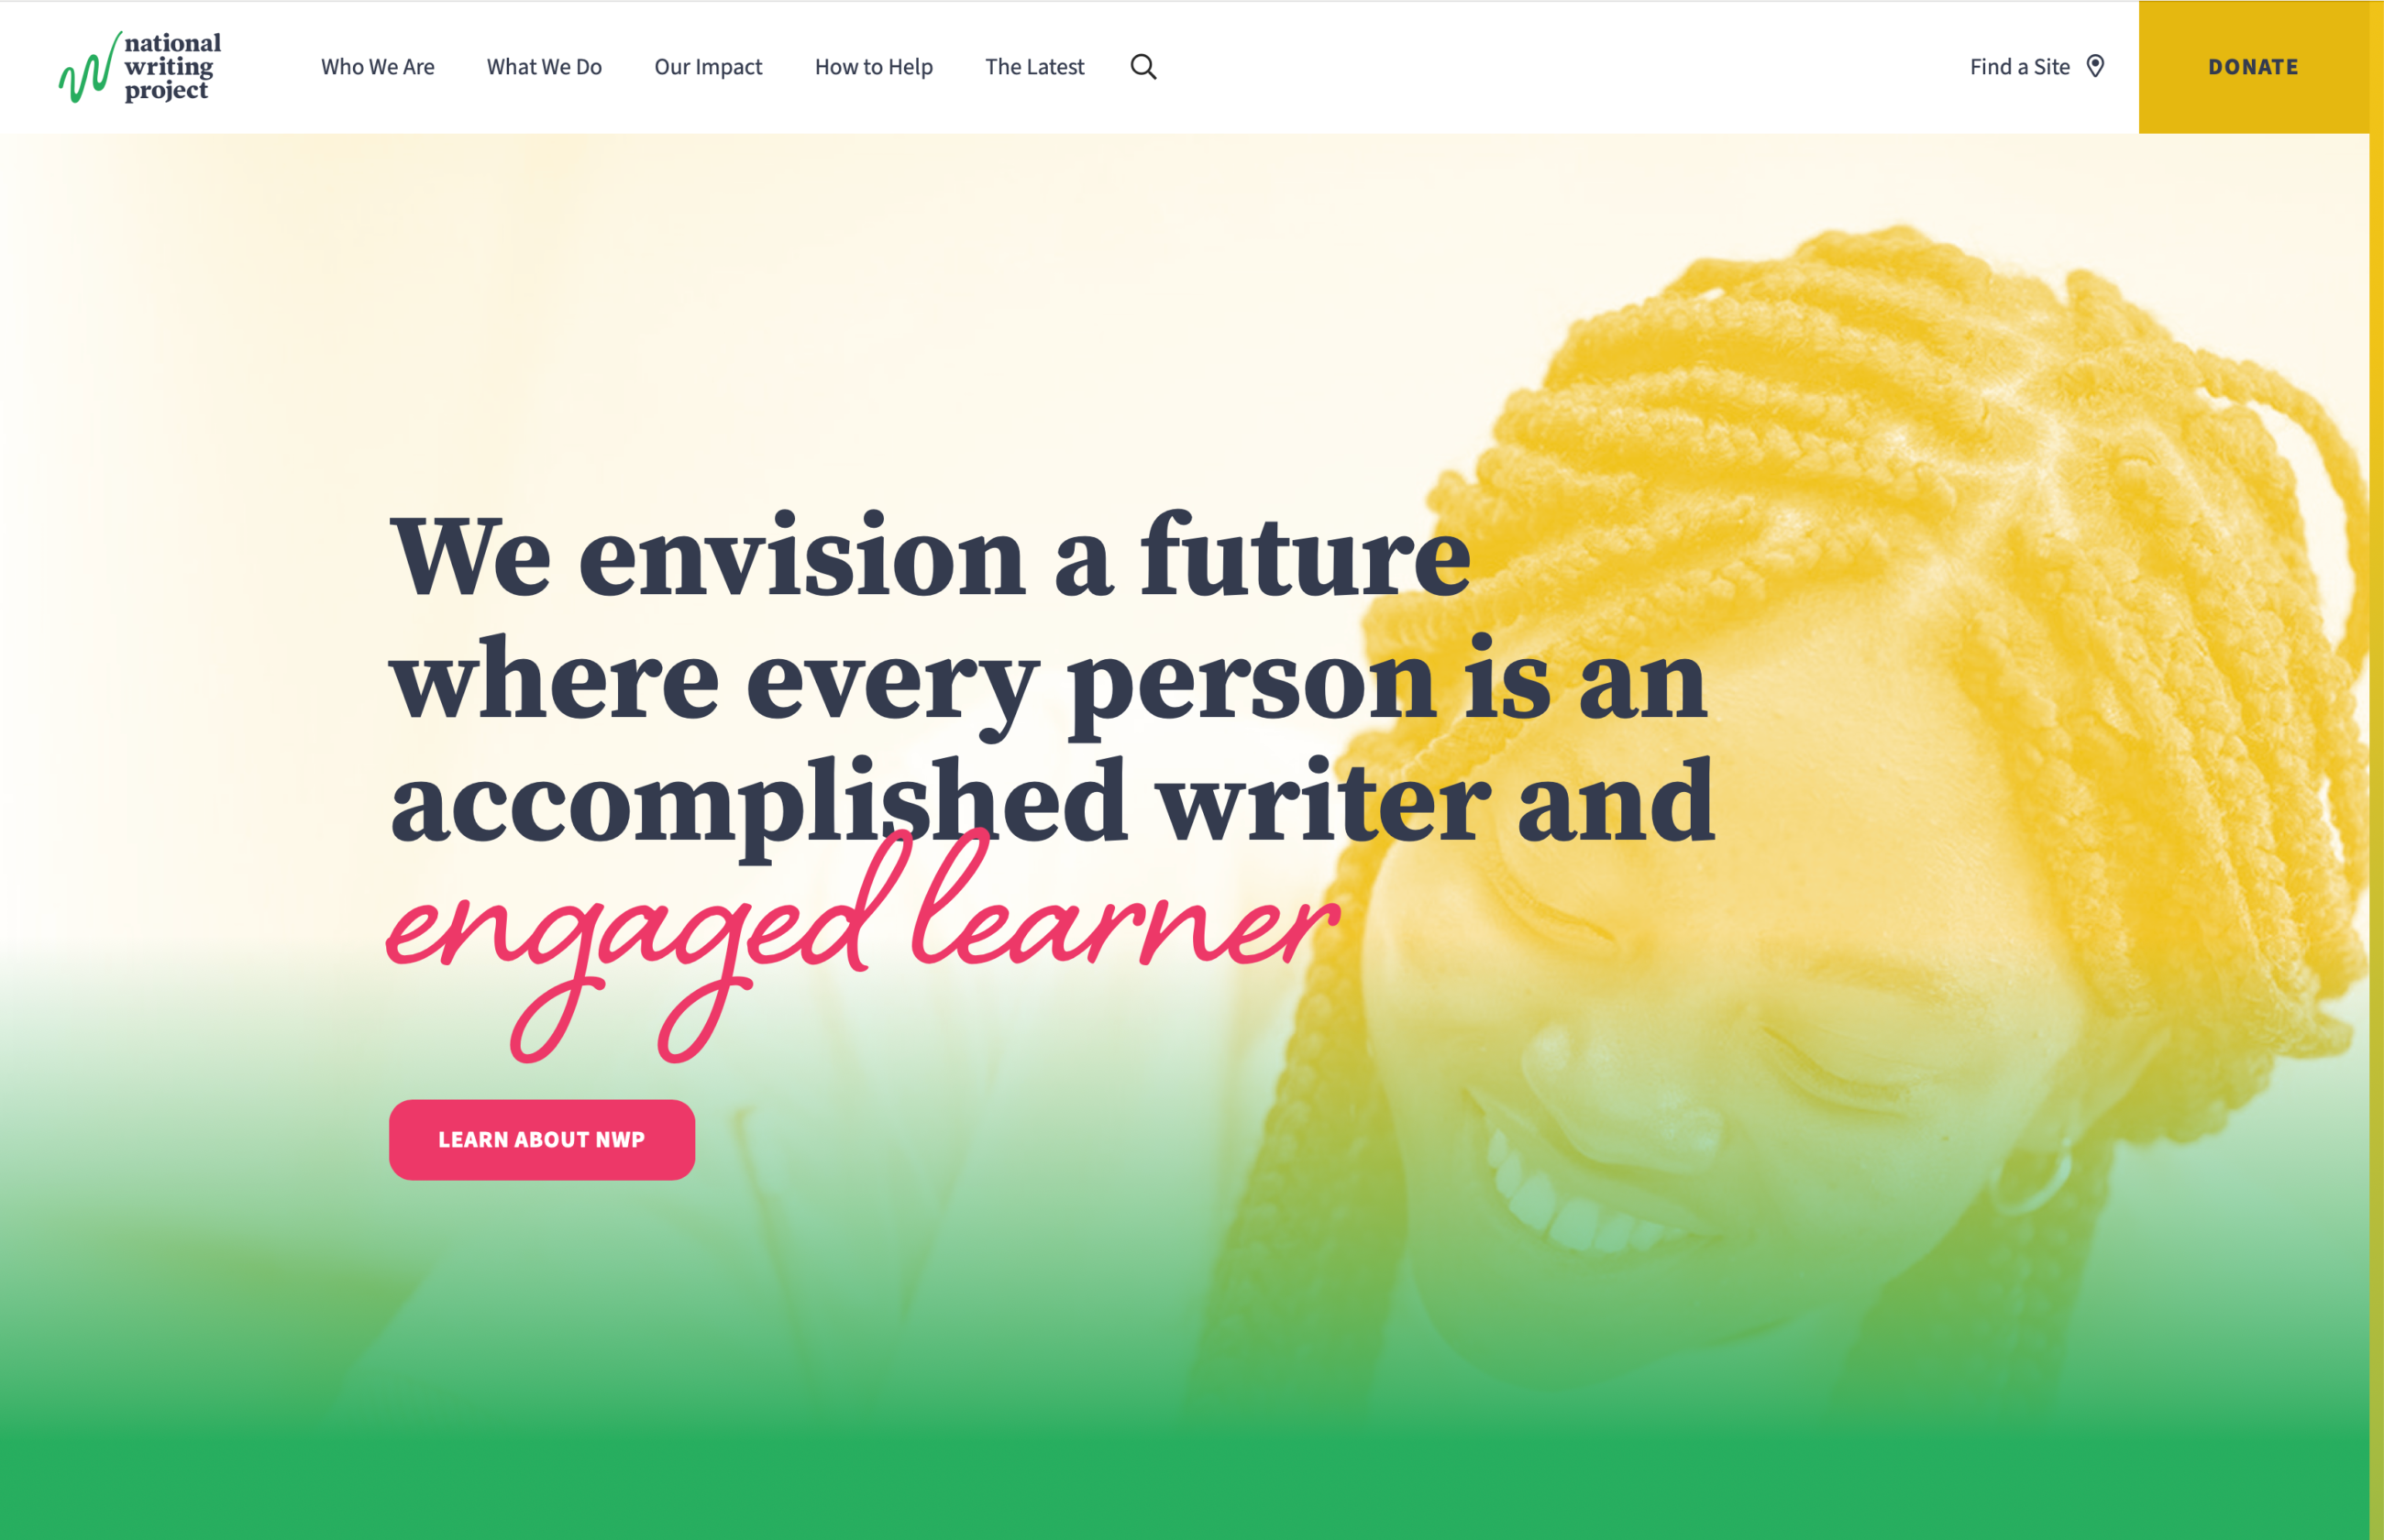 National writing project homepage